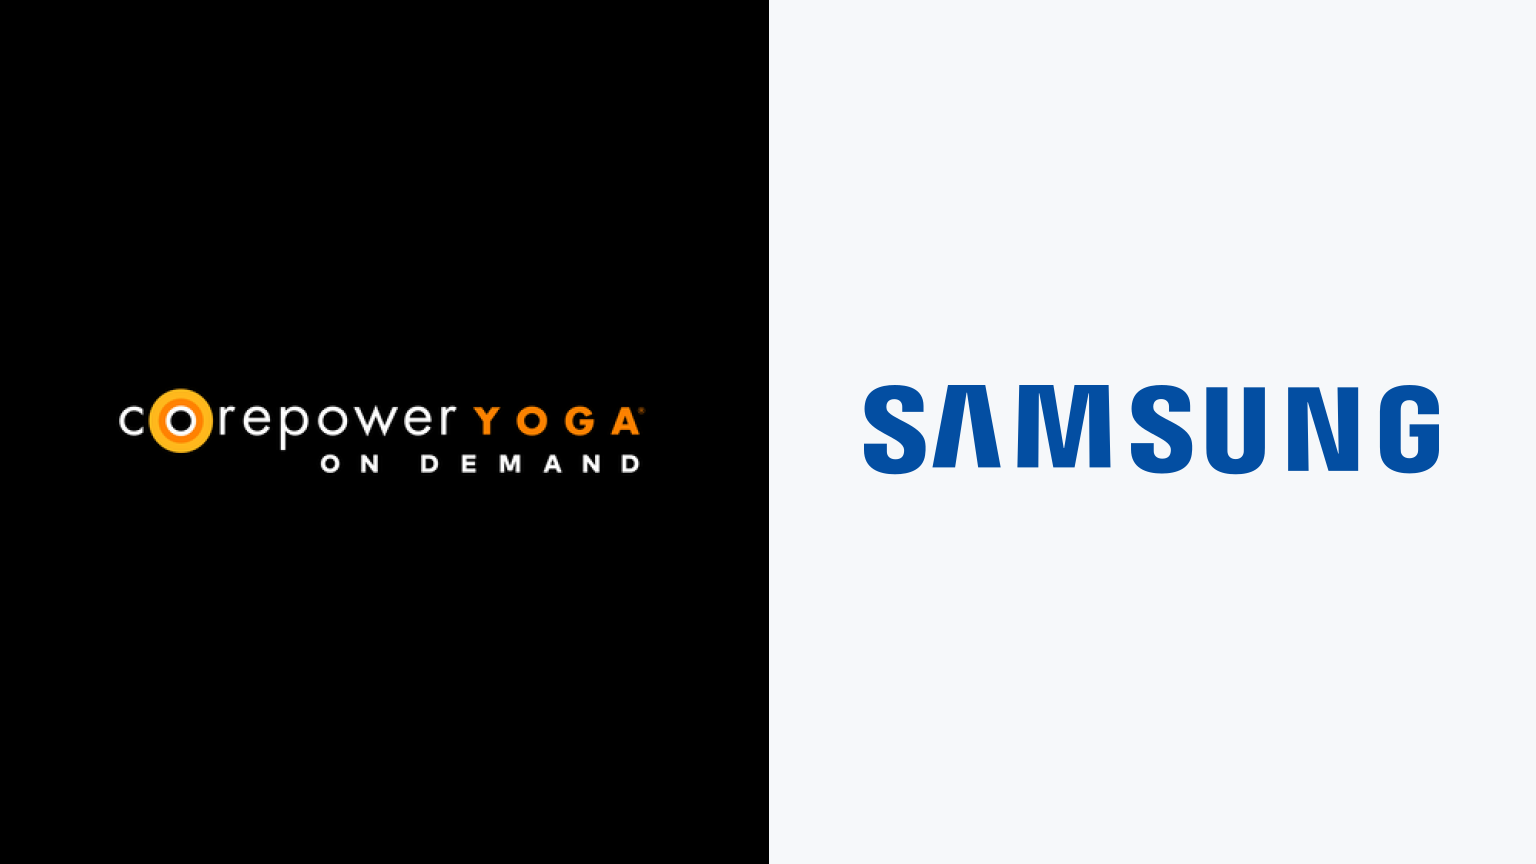 How to Watch CorePower Yoga On Demand on Samsung Smart TV – The